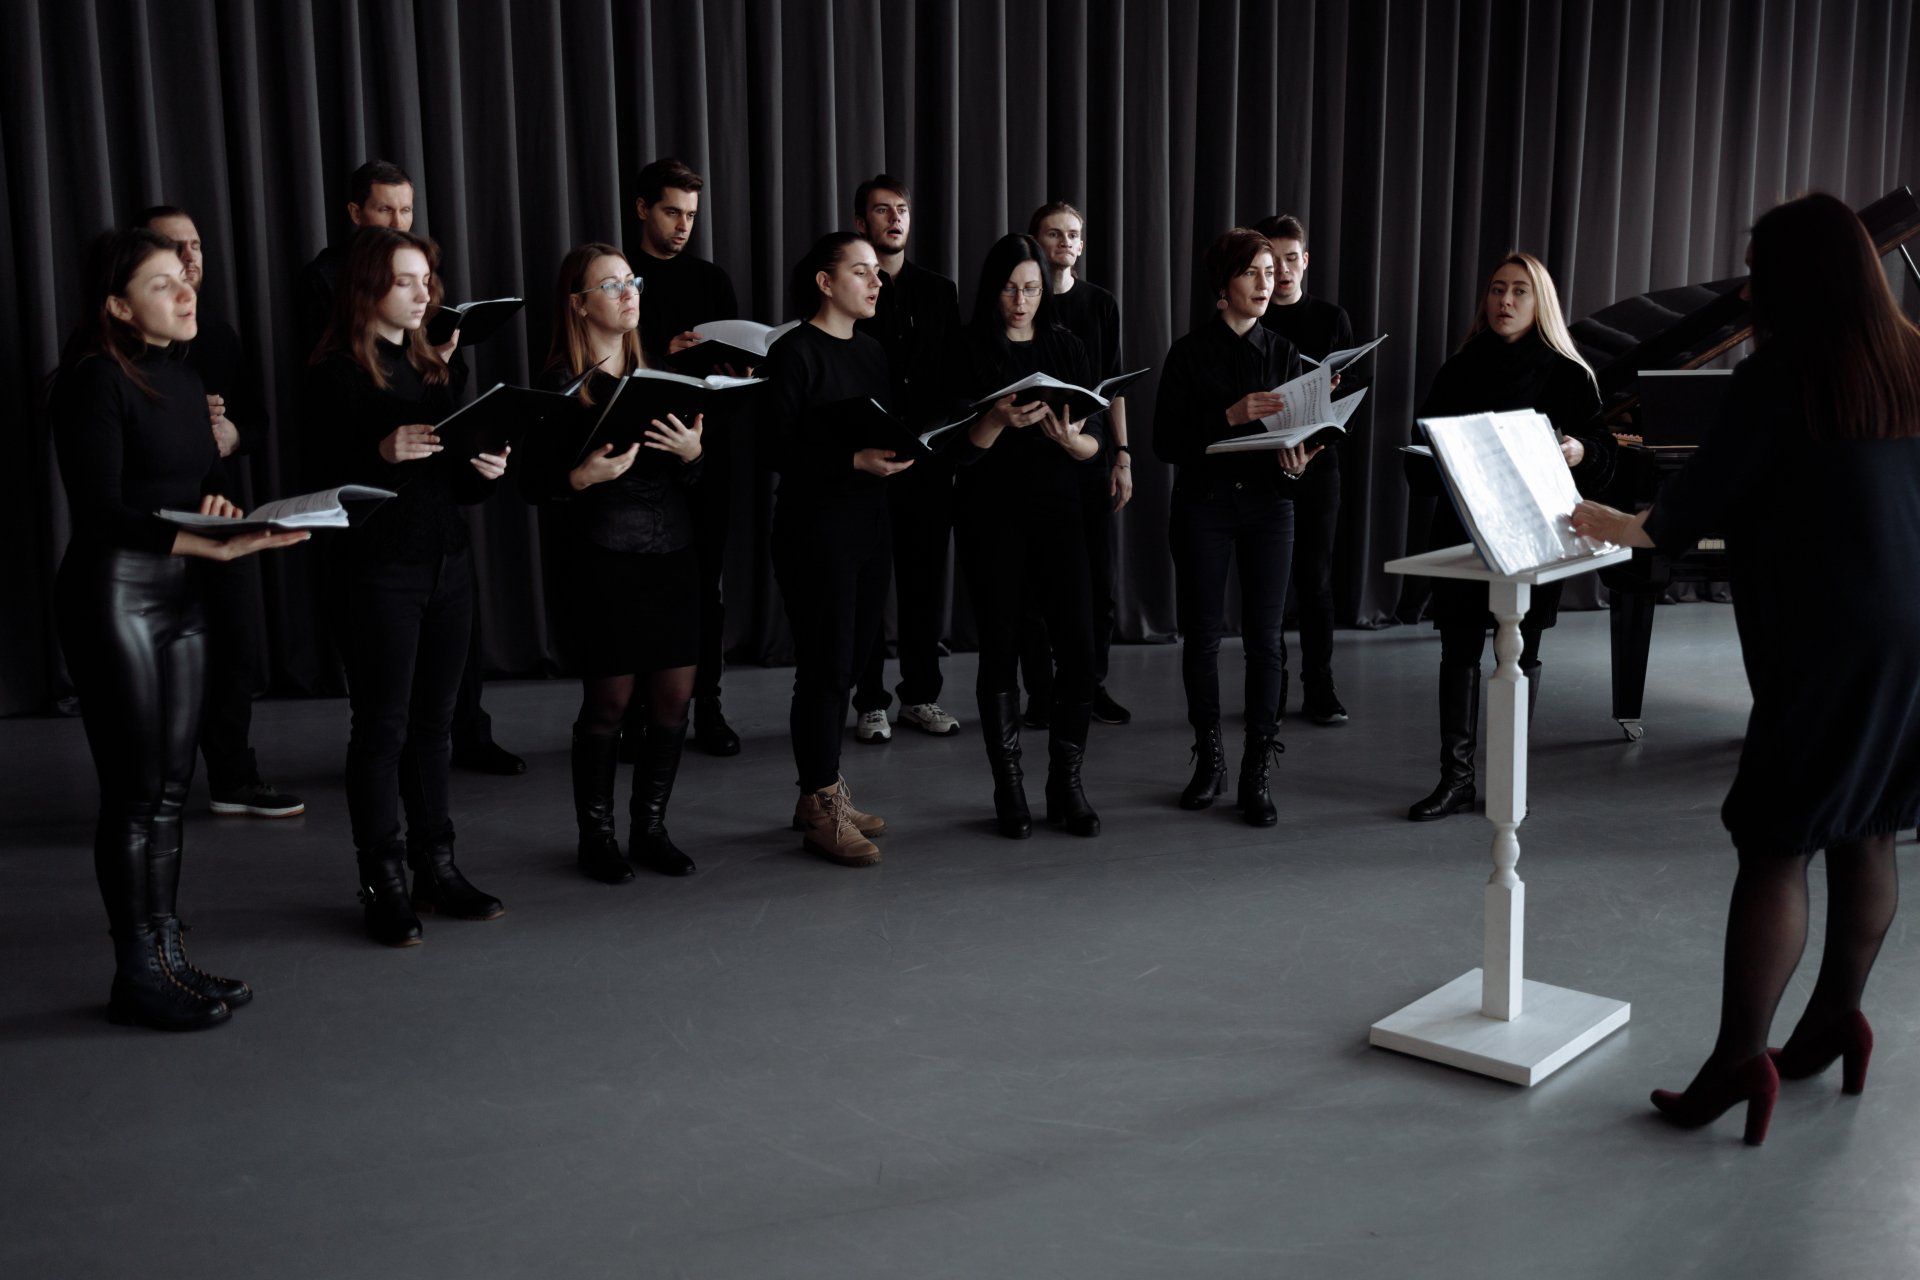 local choir stands together and sings during a live perfornance